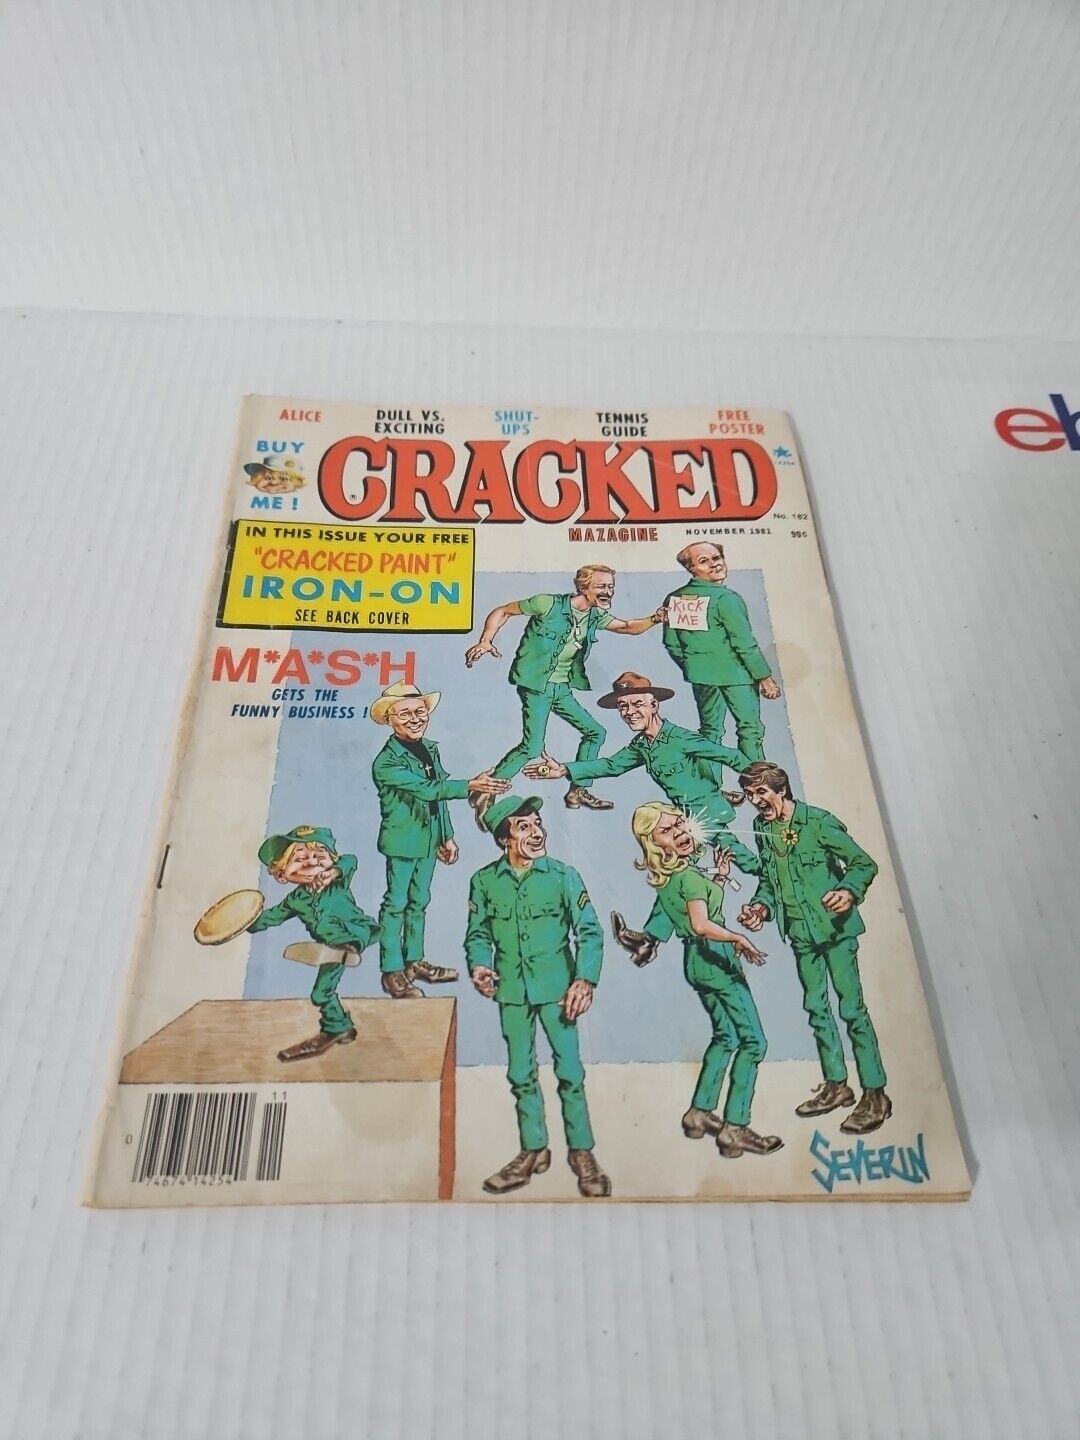 Cracked Magazine Issue #182 November 1981 M*A*S*H In Acceptable Condition/wear